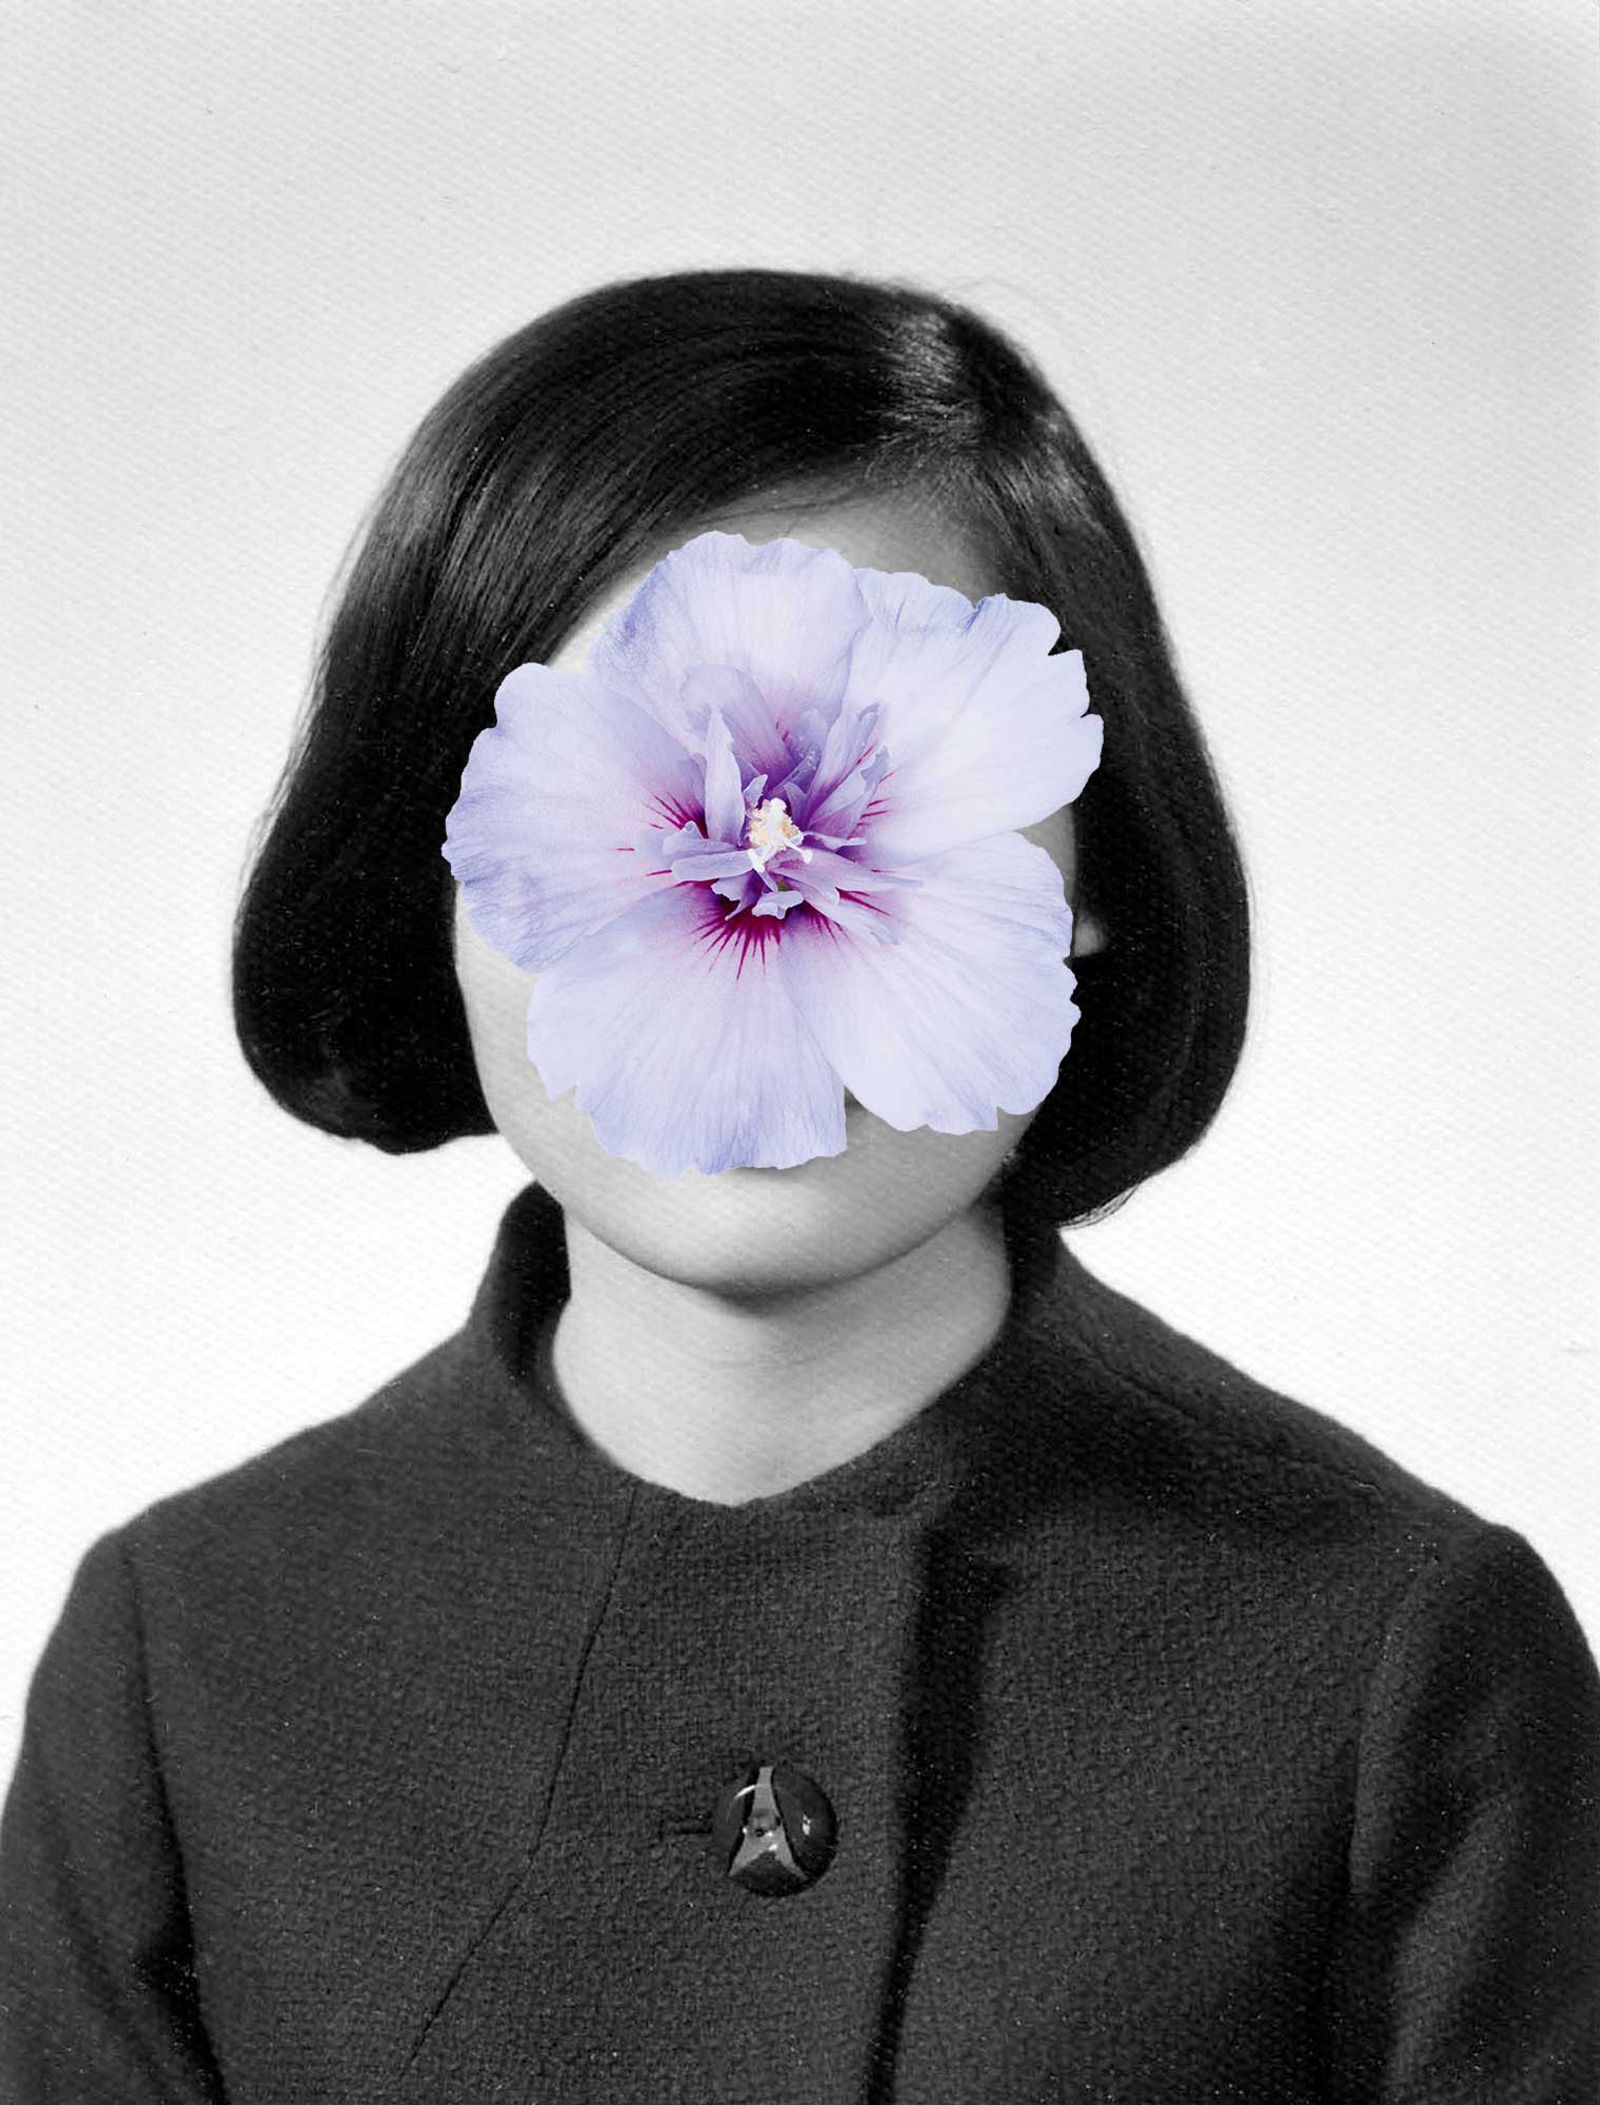 © Lee Grant - "Women are flowers". A portrait of my Mother with the Korean national flower, Hibiscus syriacus